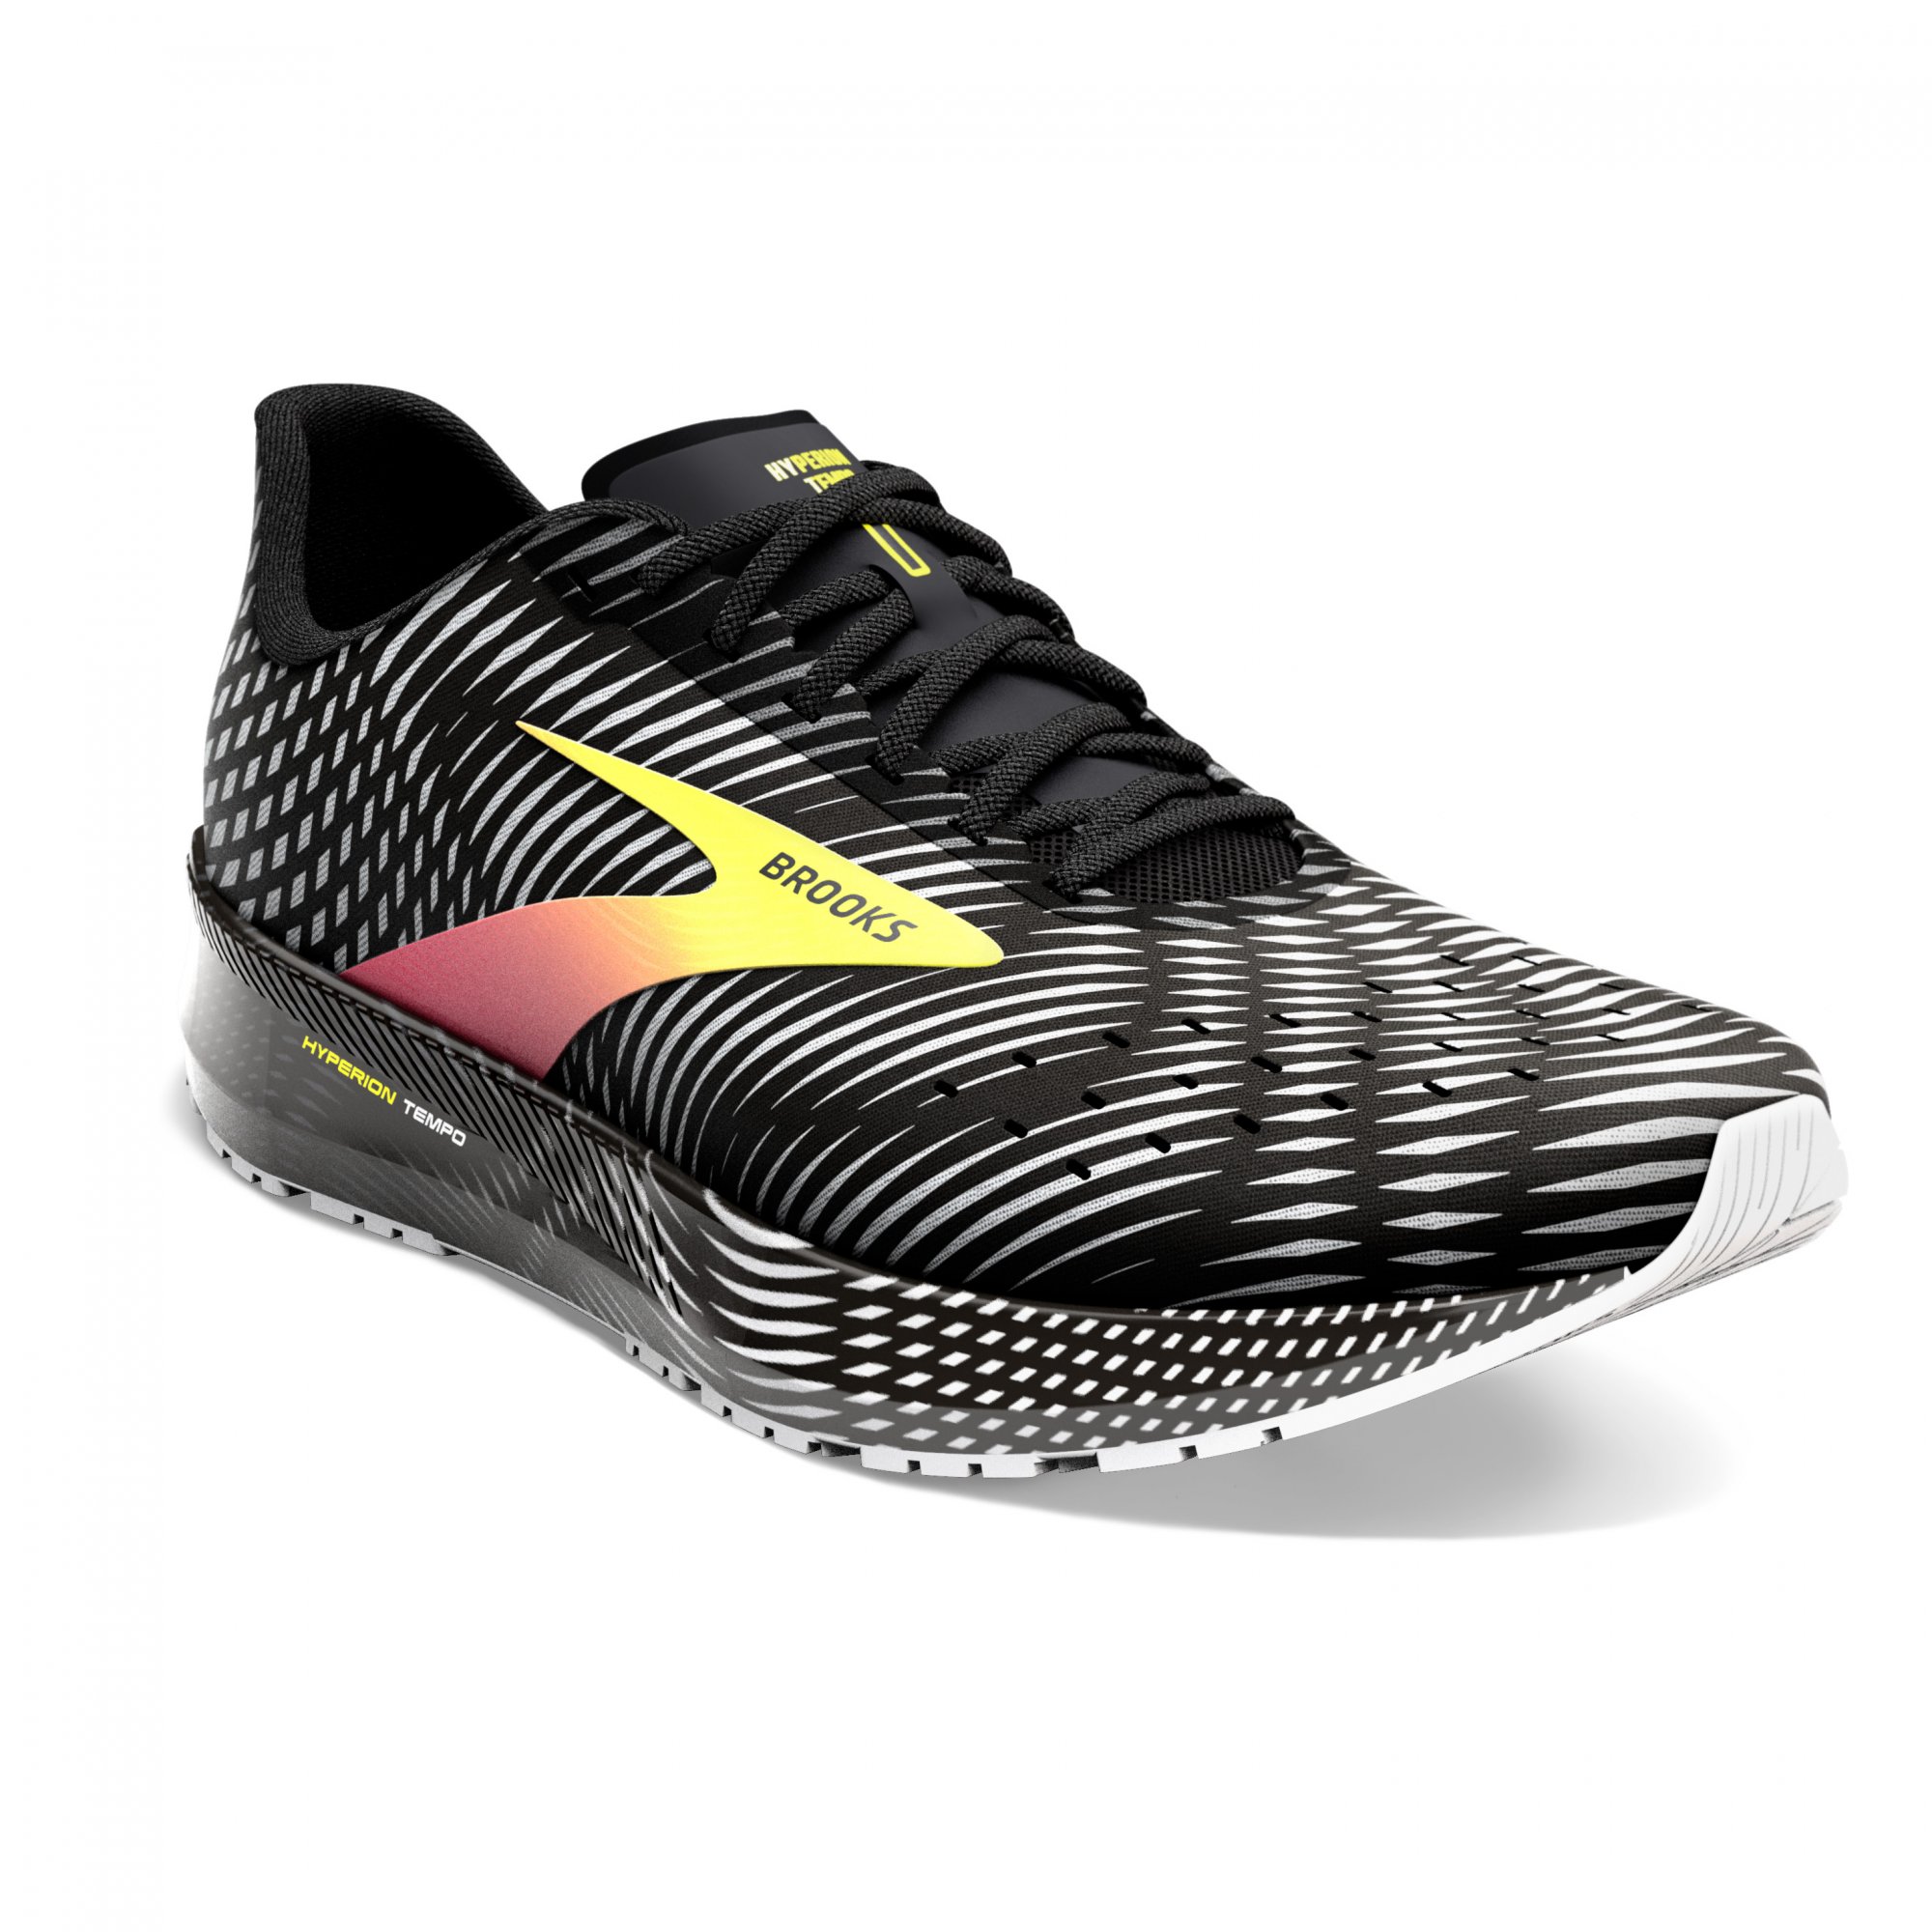 BROOKS Hyperion Tempo Black/Pink/Yellow